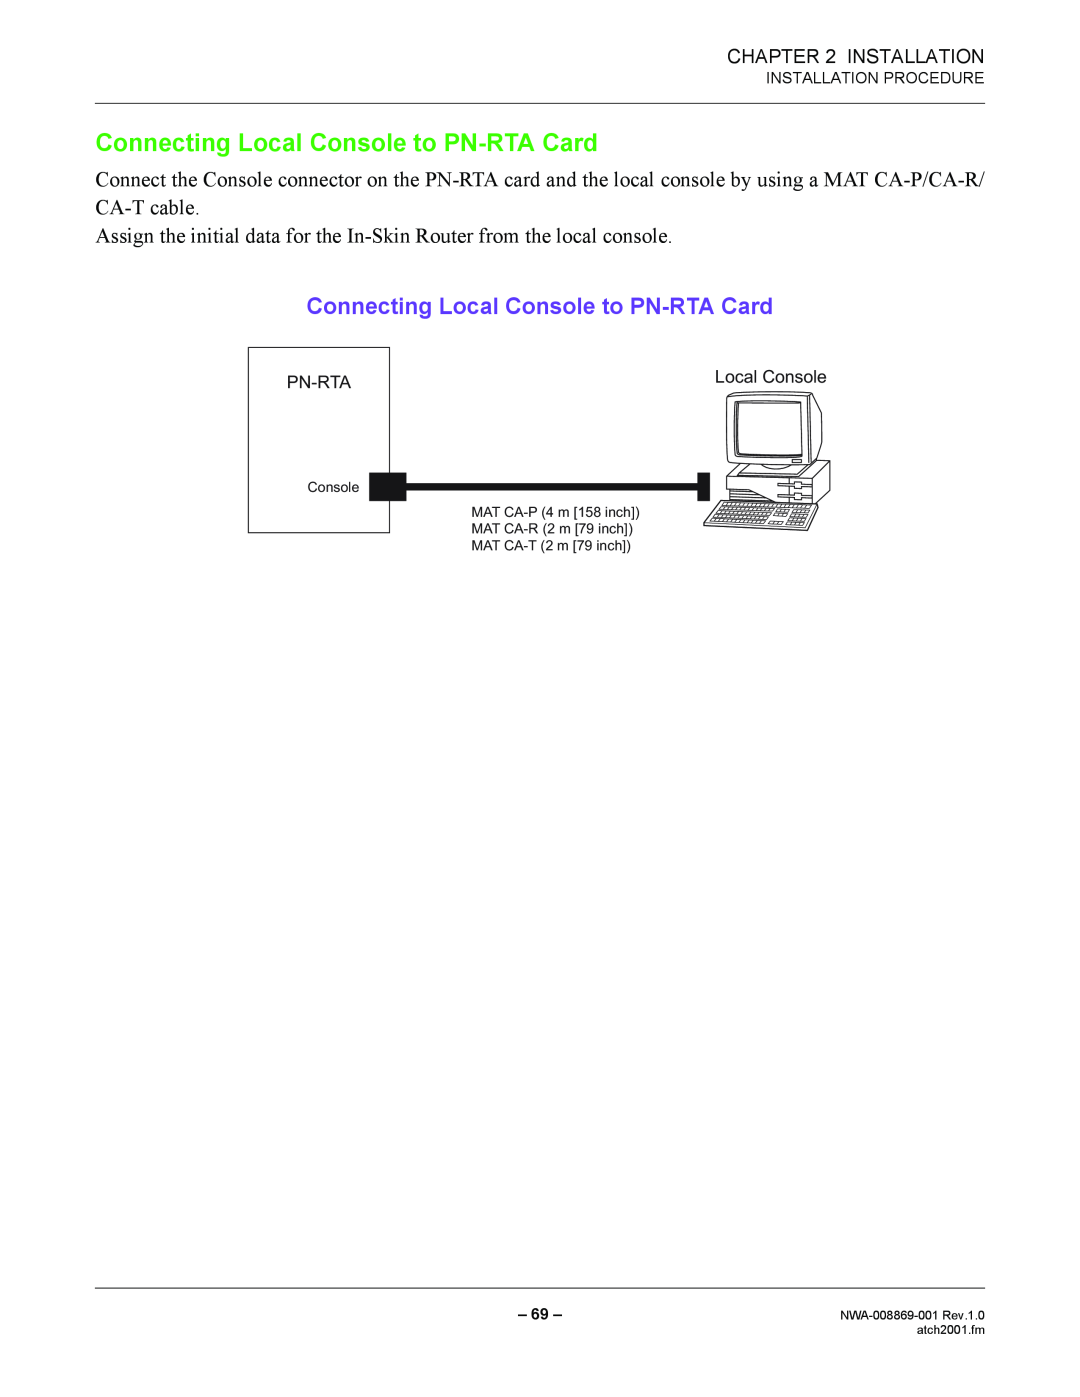 NEC manual Connecting Local Console to PN-RTA Card, Installation Procedure, NWA-008869-001 Rev.1.0 